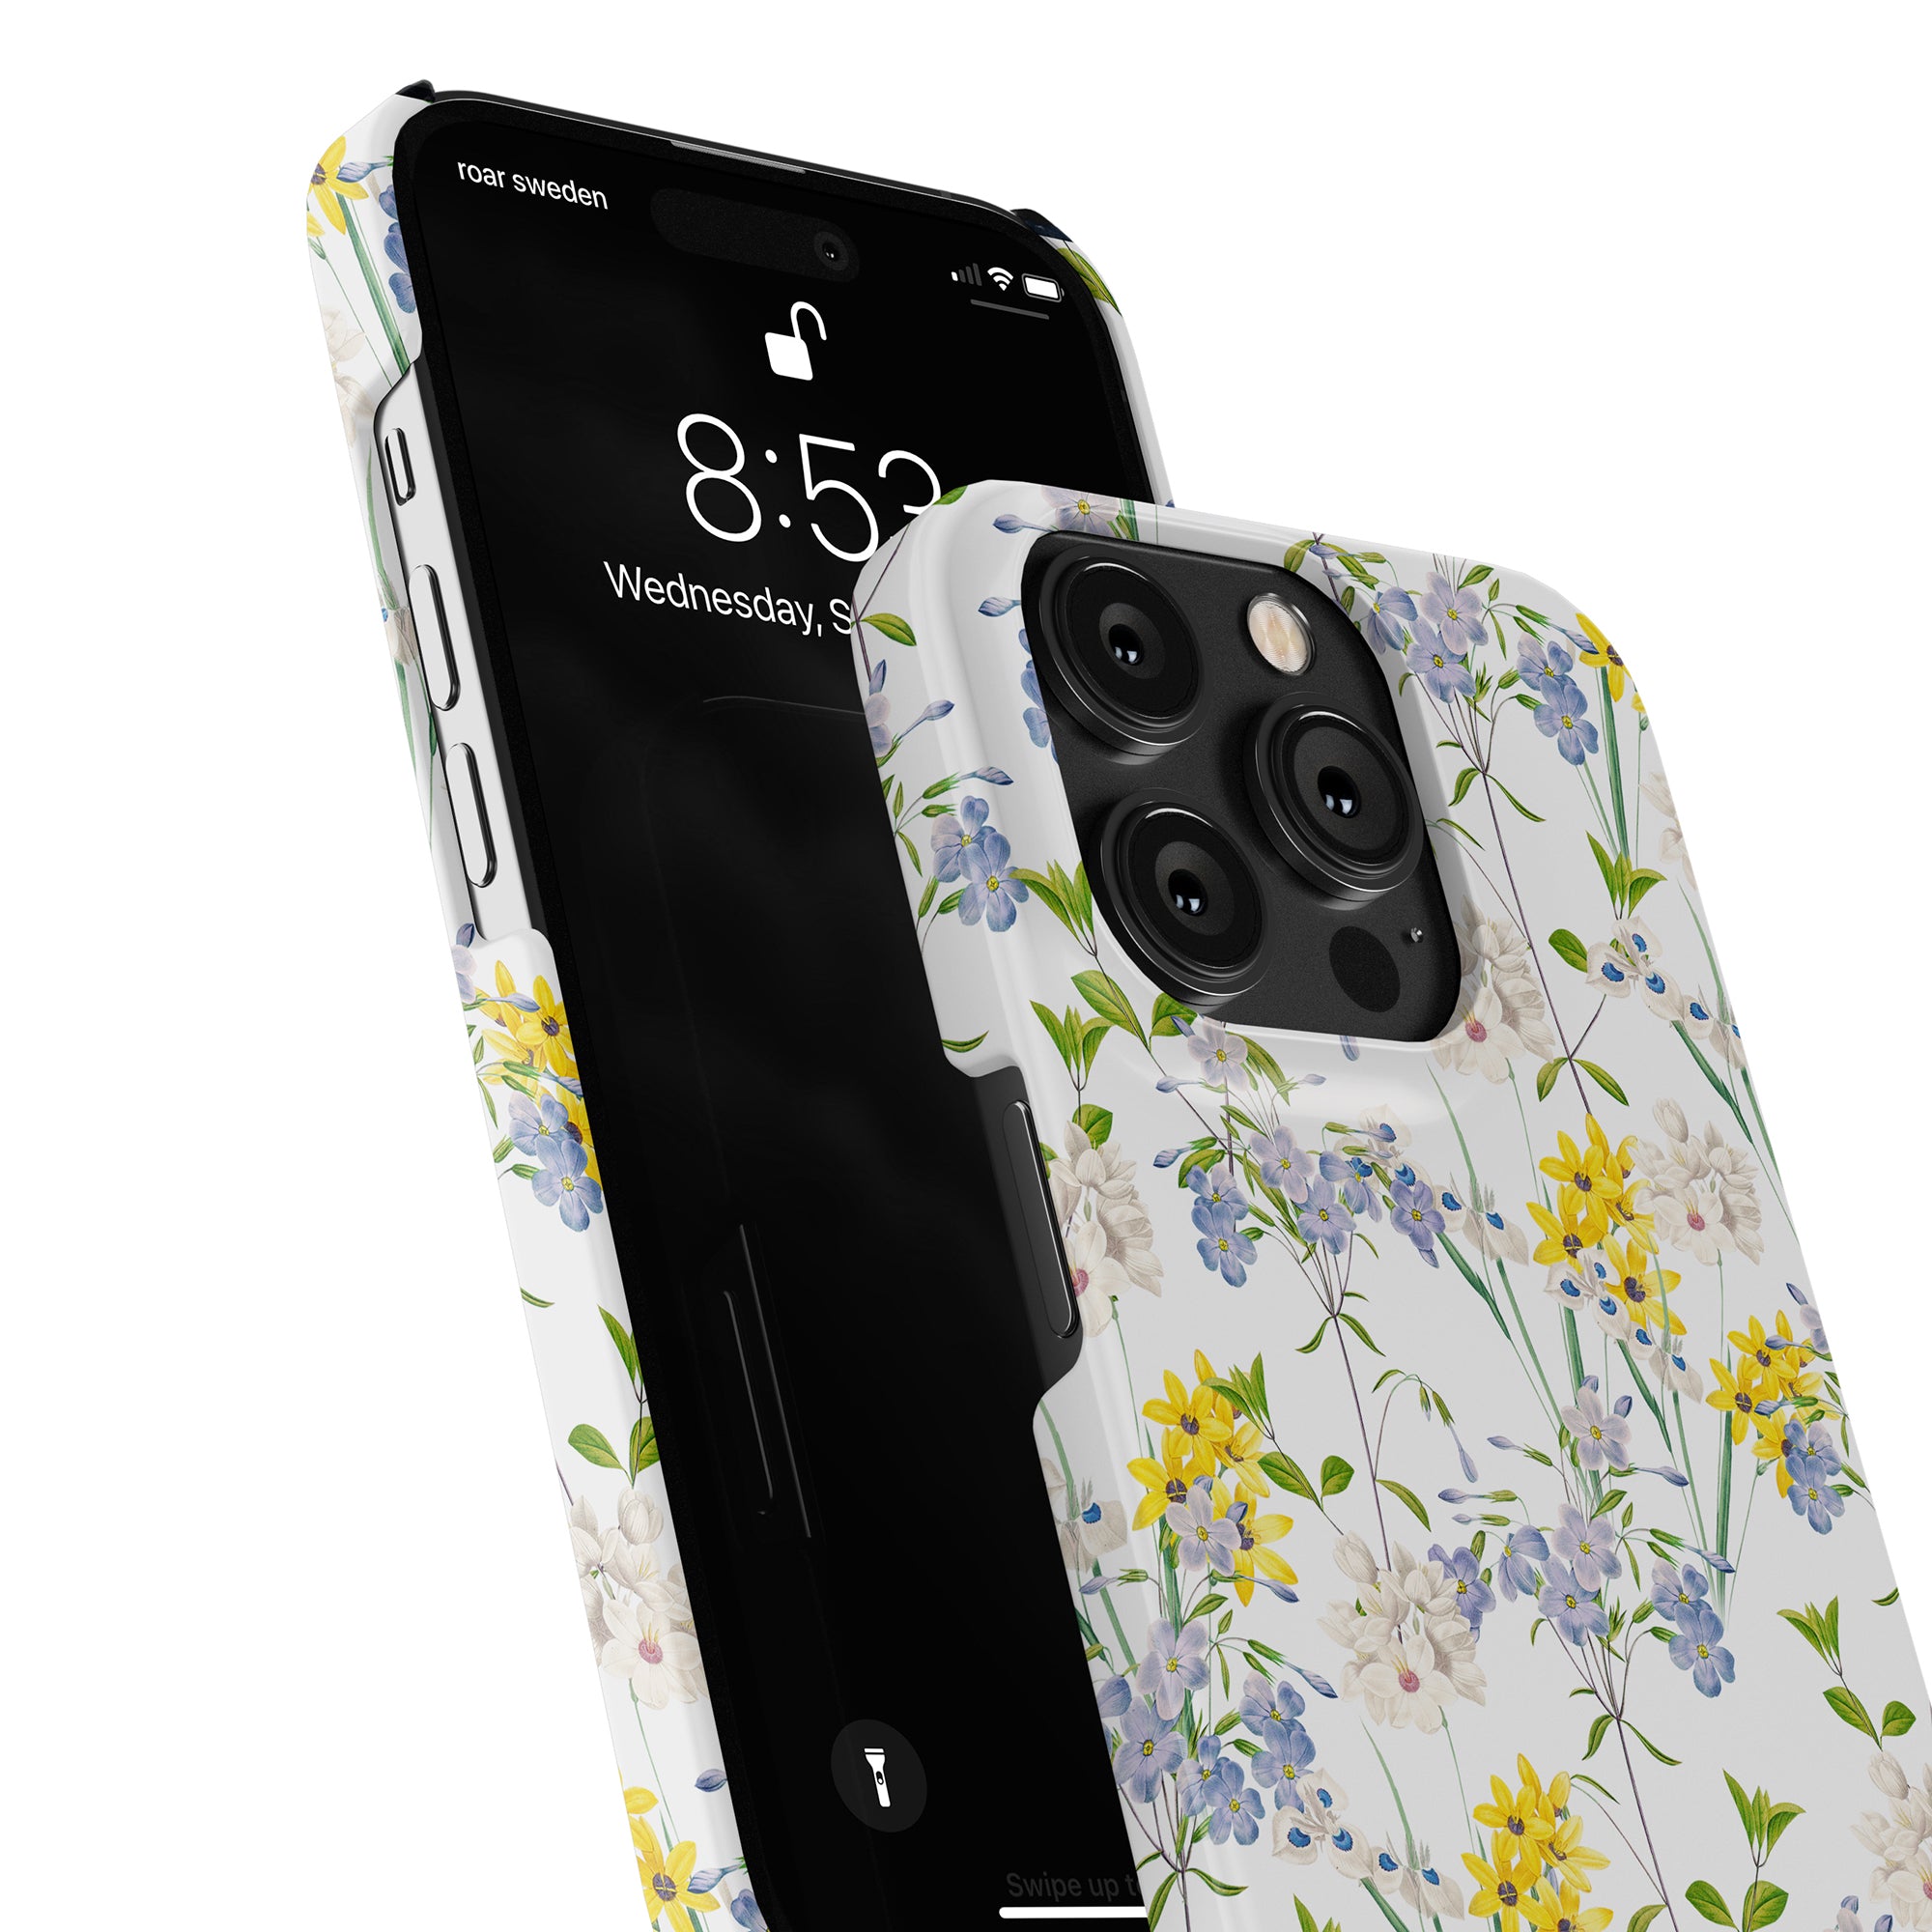 Two smartphones with a Summer Flowers - Slim case design, one facing front showing the time, the other facing back revealing the waterproof camera layout.